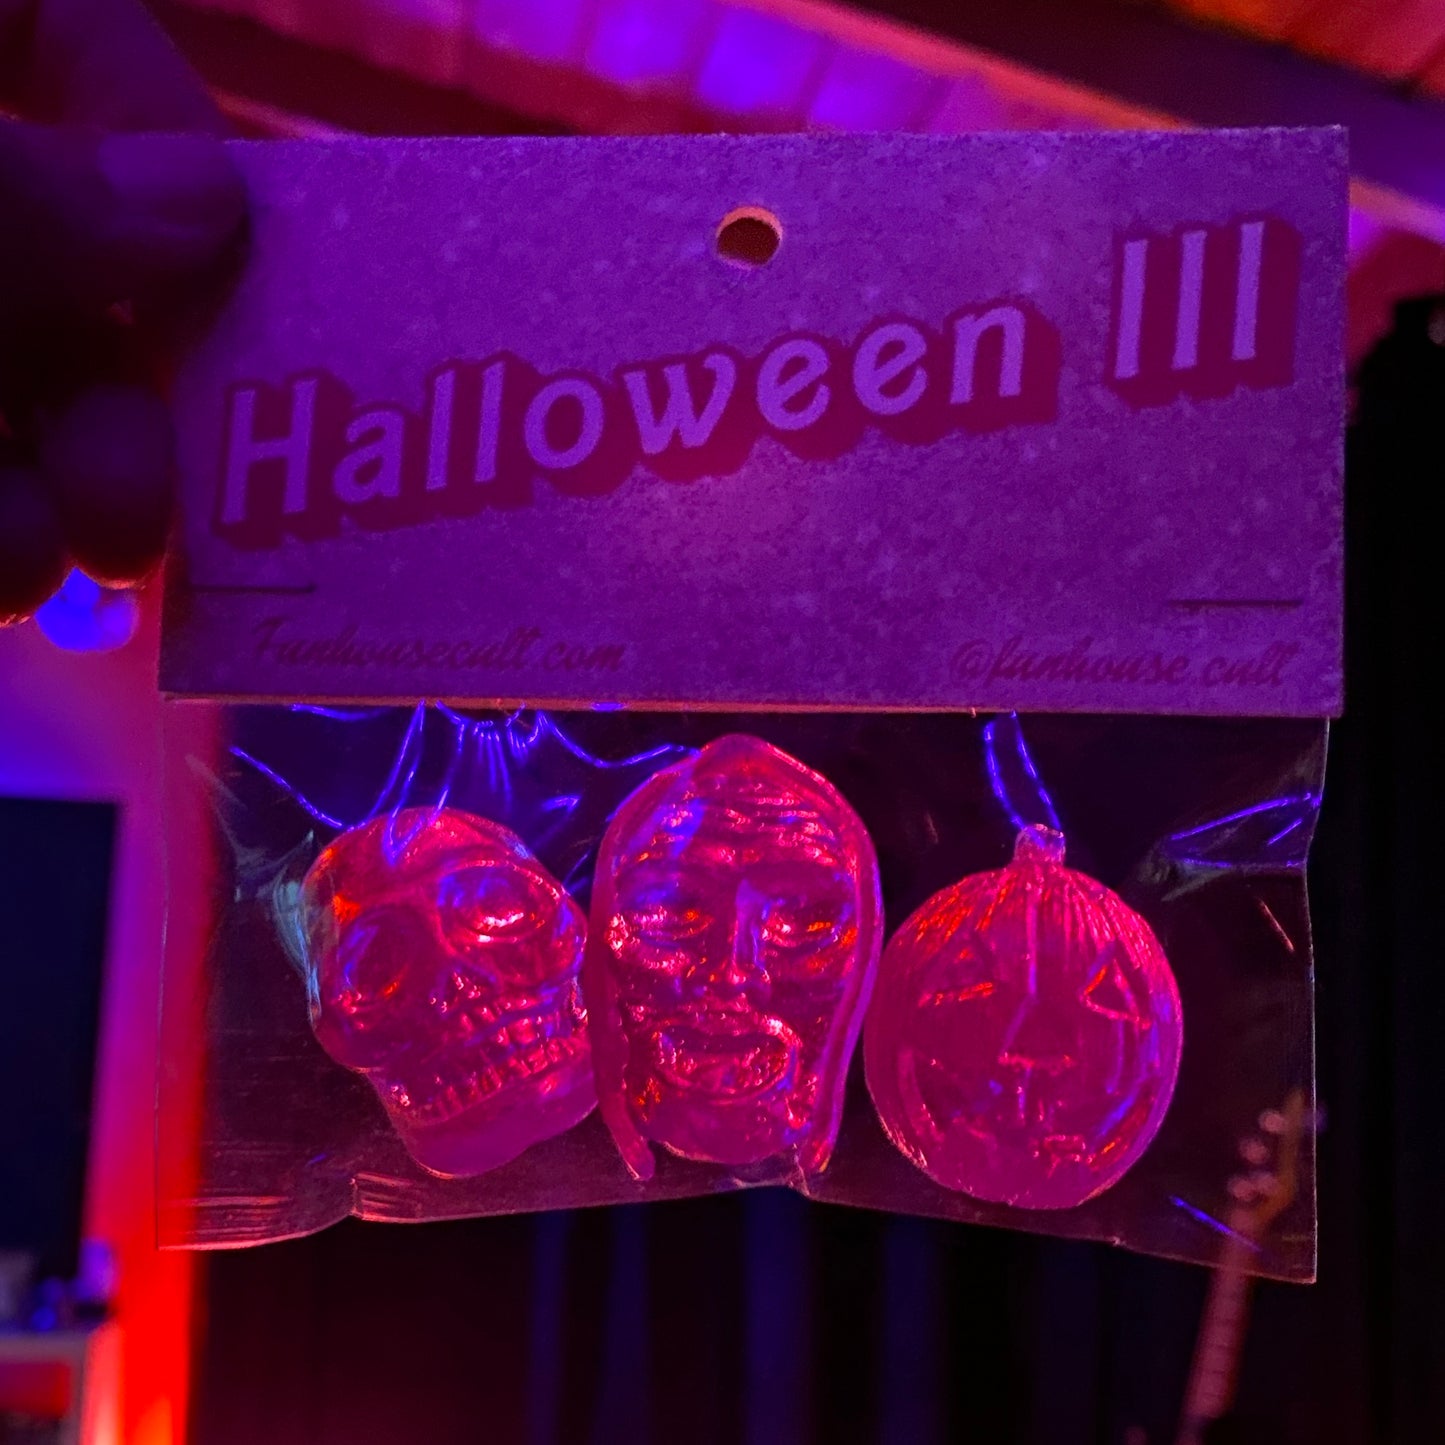 Halloween III clear pink collectible toy